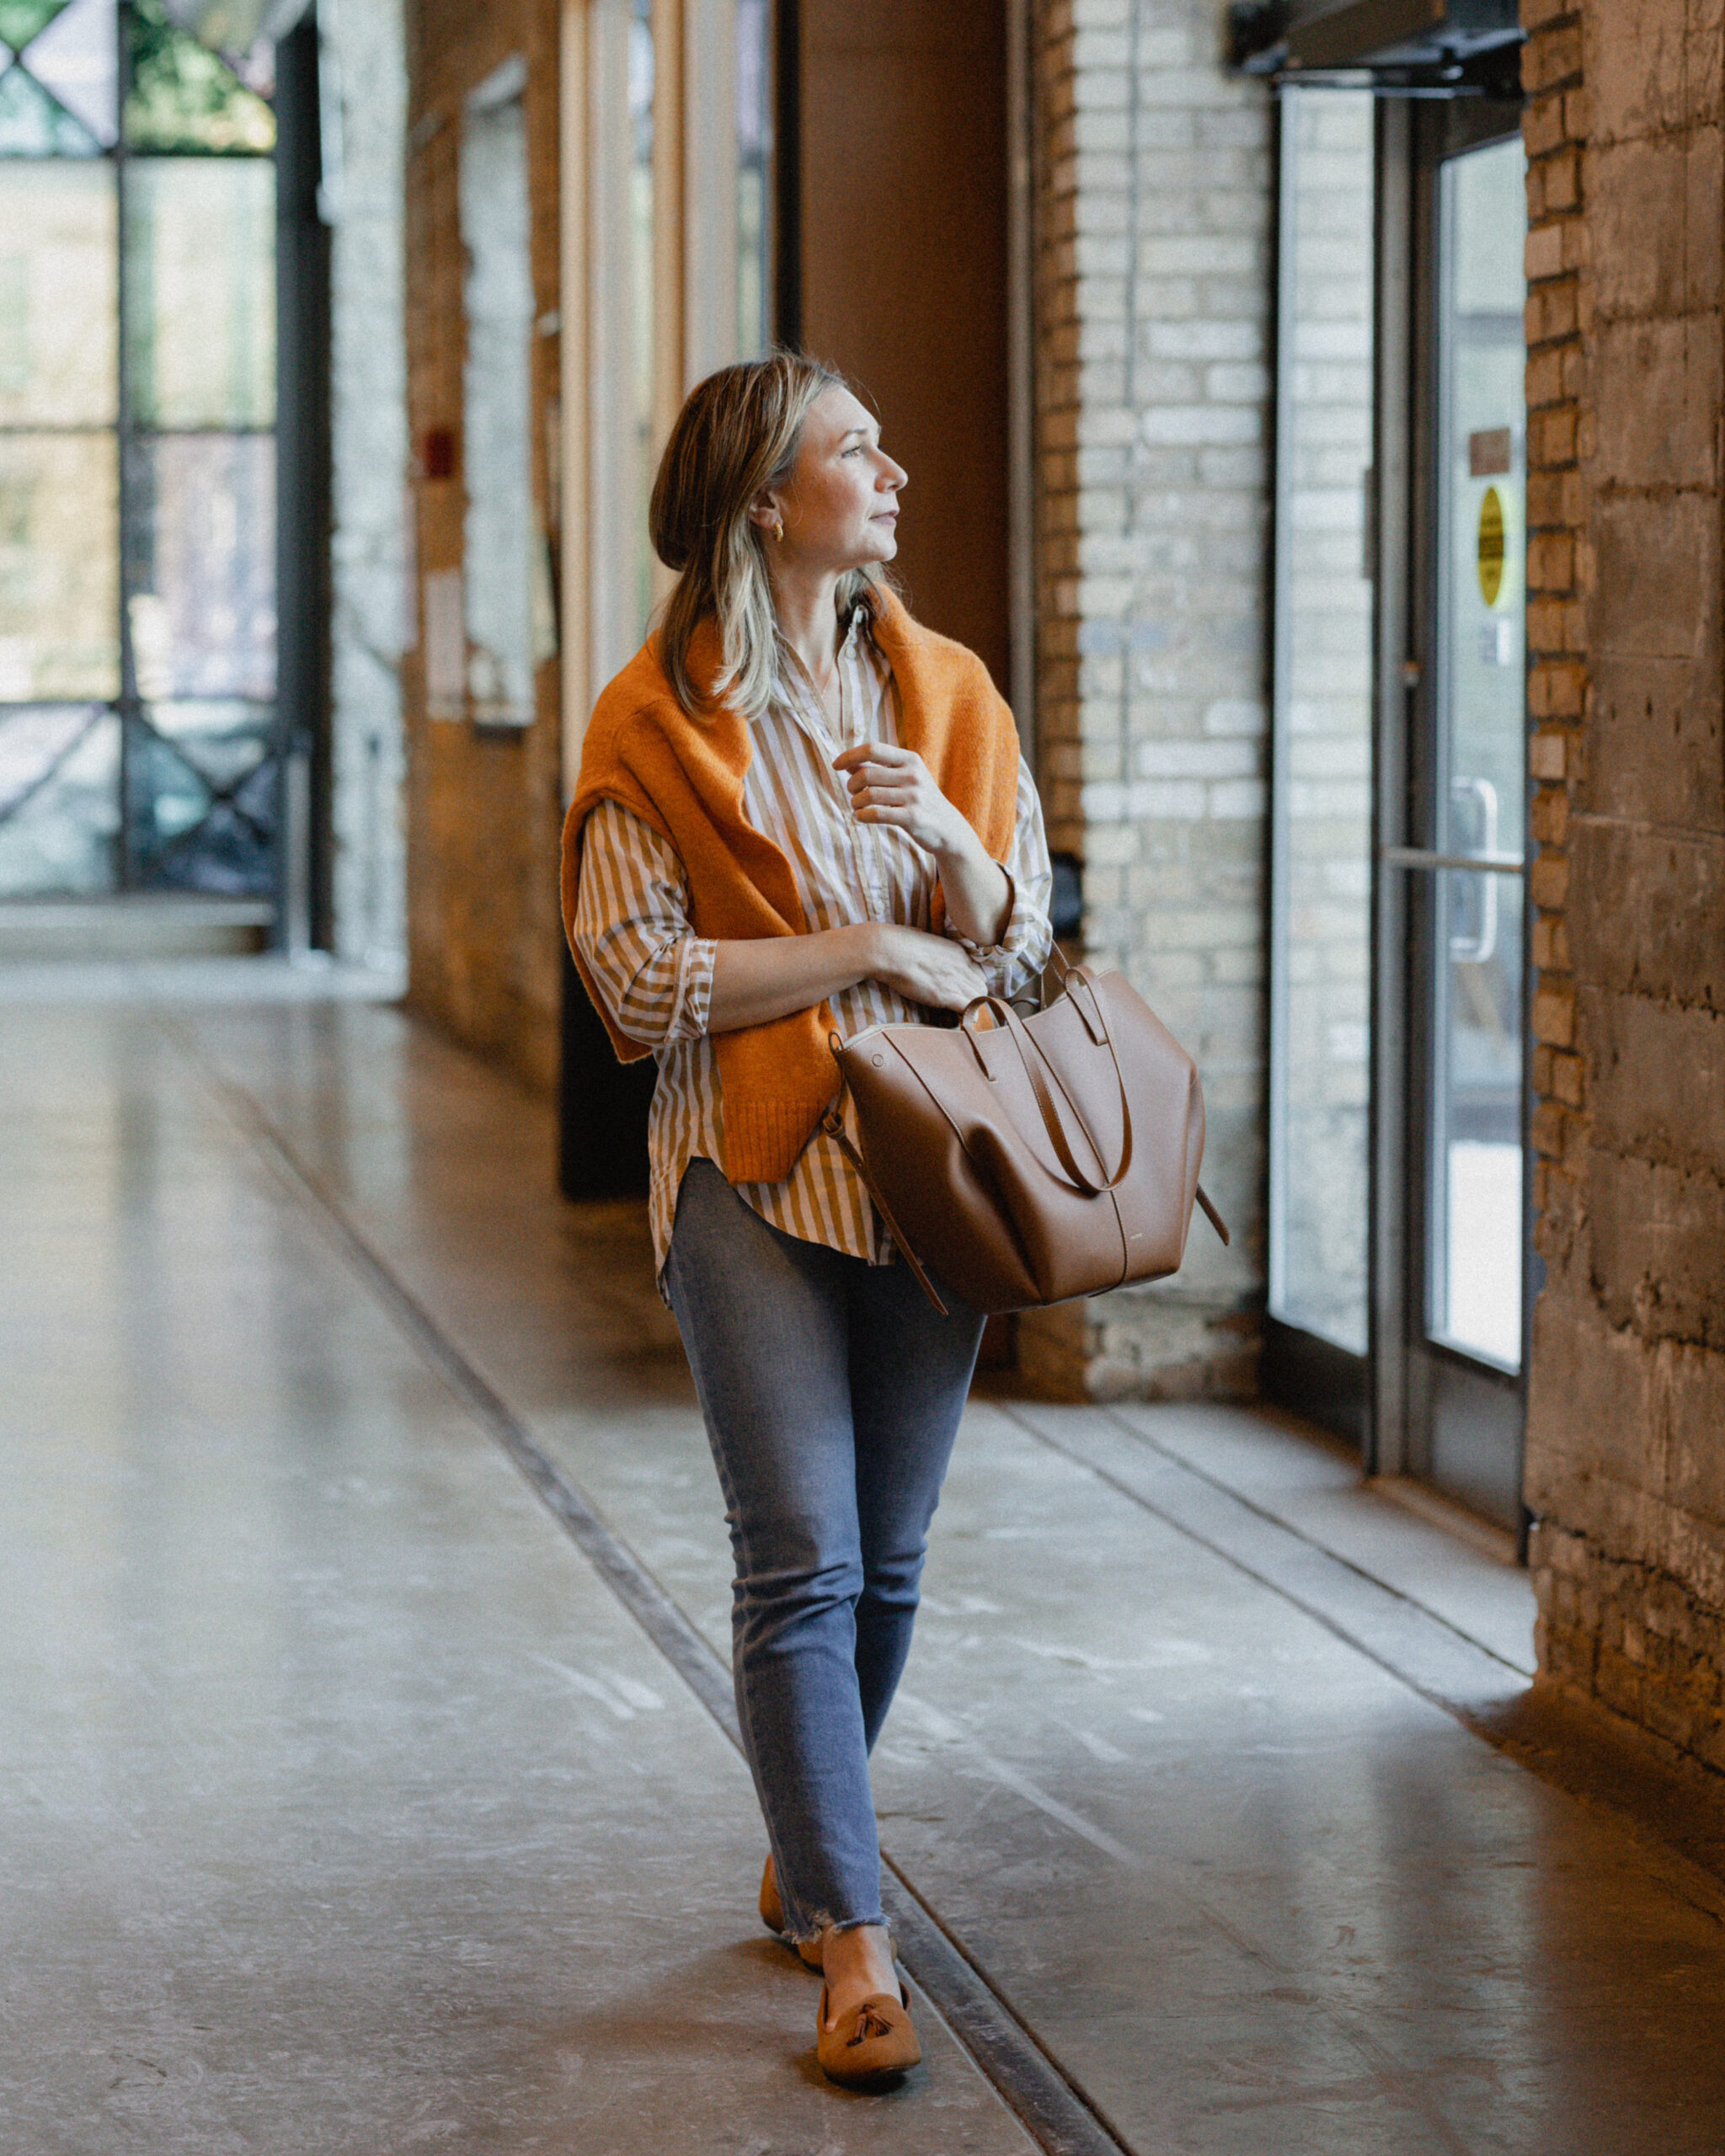 Karin Emily wears an orange stripe button down with an orange sweater over her shoulders paired with a comfy pair of jeans, loafers and an oversized tote bag